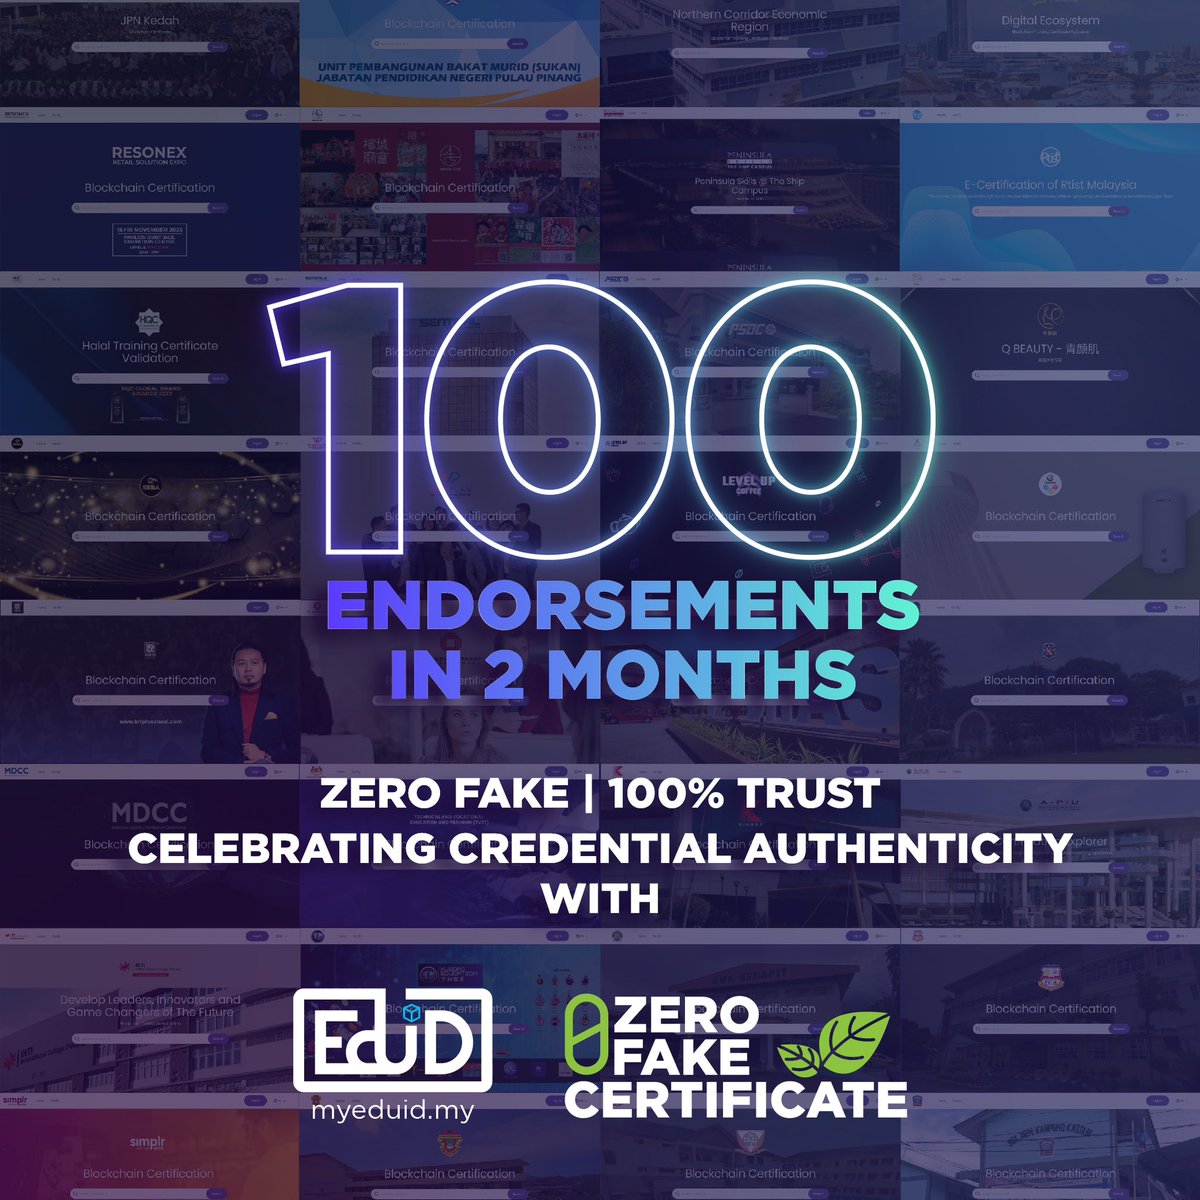 Our Zero Fake Certificate Campaign by MyEduID just hit a major milestone with 100 endorsements from top education institutions and organisations in just two months! 

Thank you for supporting authenticity and integrity in education. #ZeroFake #100Endorsements #EducationIntegrity